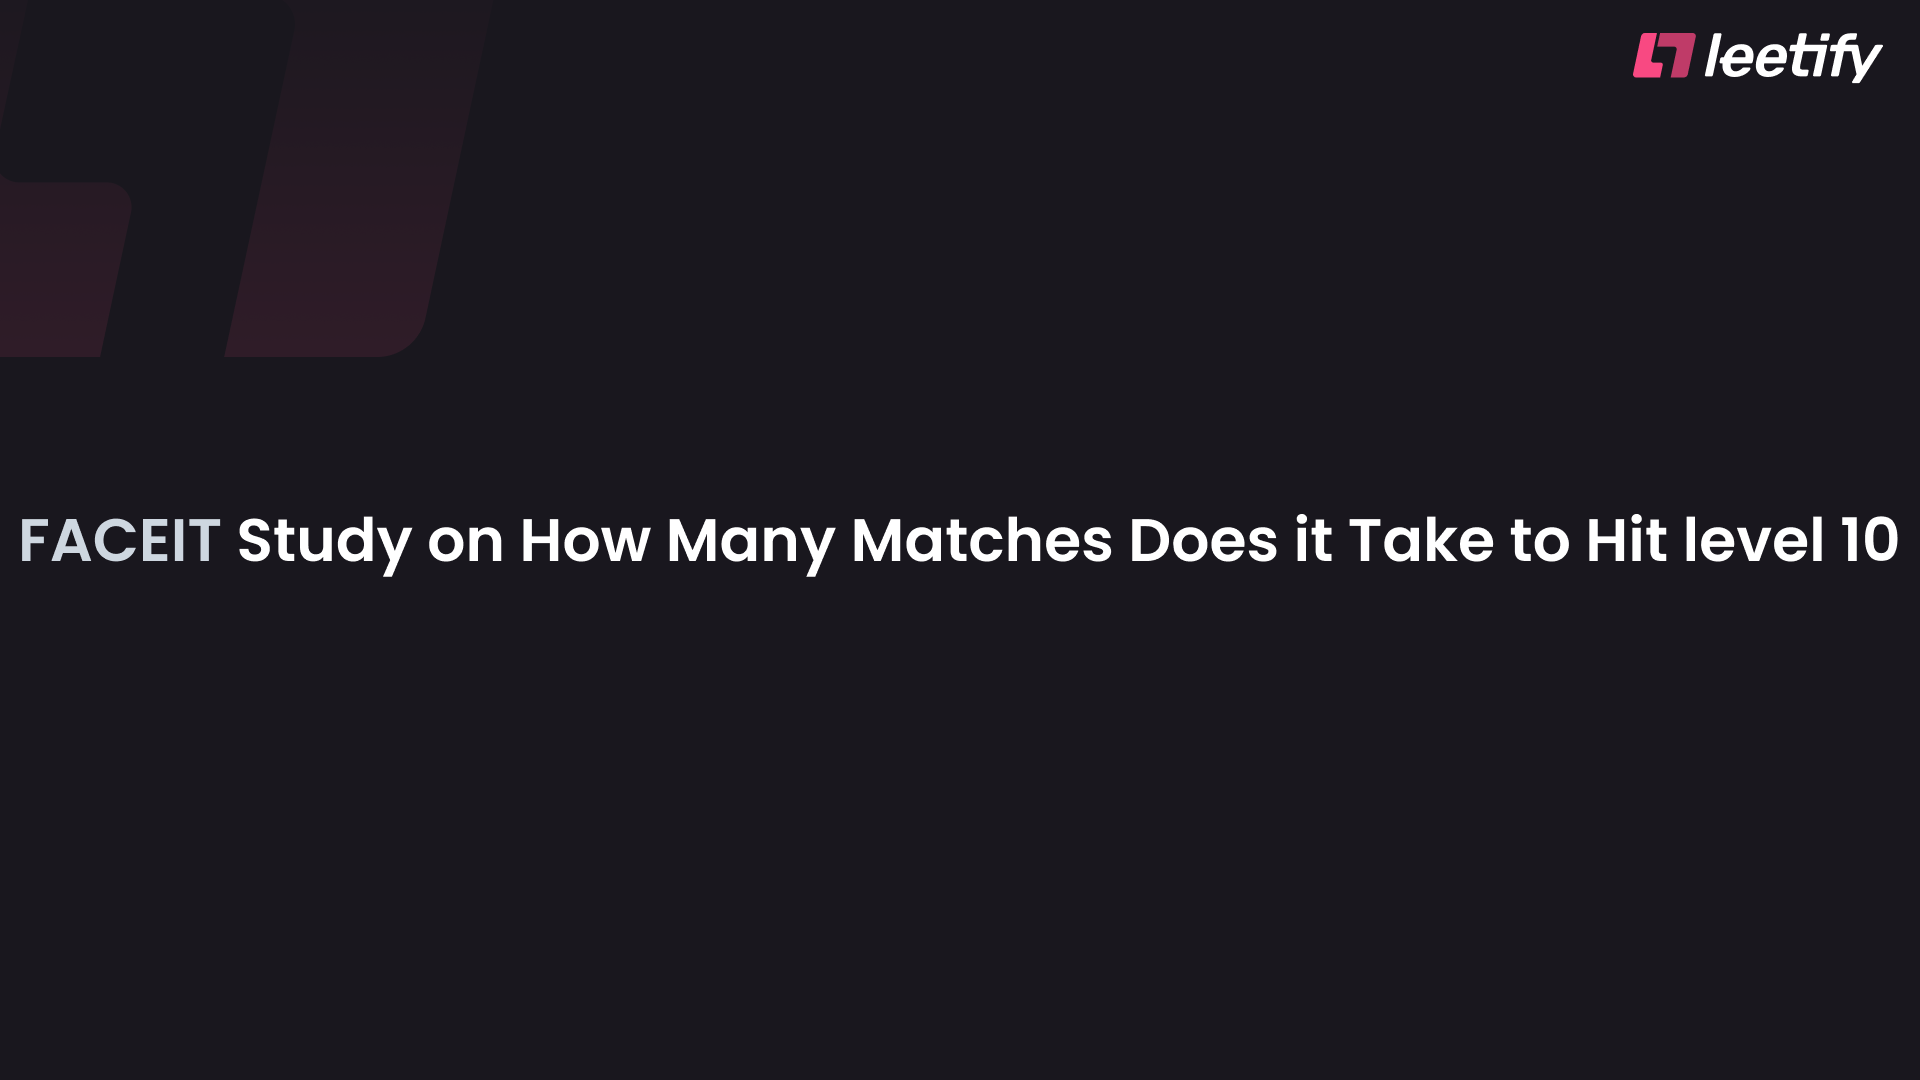 How many matches does it take to hit FACEIT level 10?